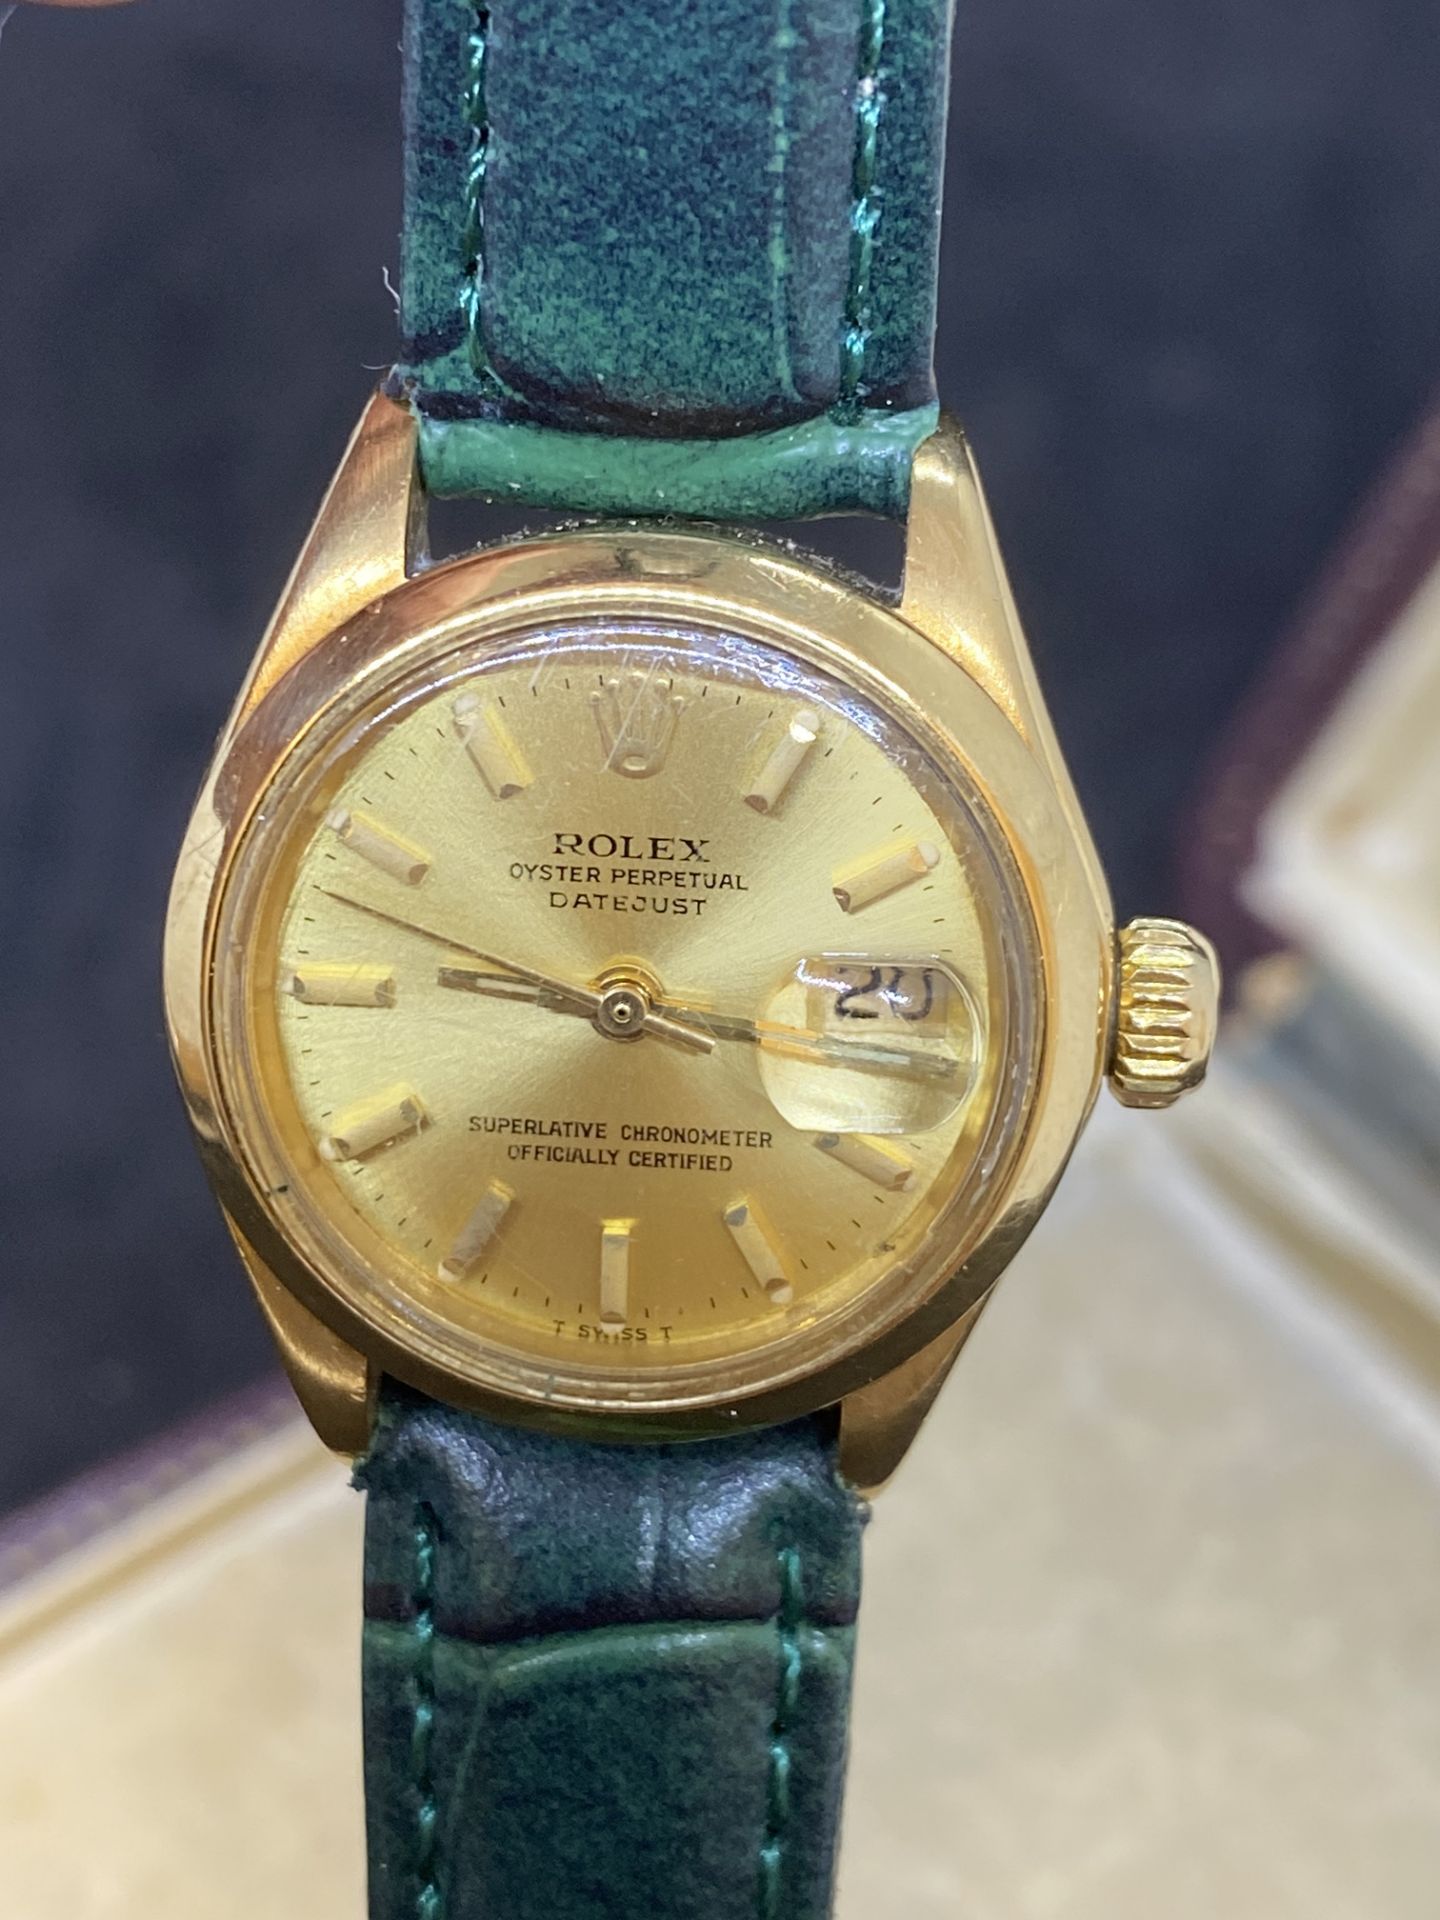 18ct GOLD ROLEX WATCH ON LEATHER STRAP - Image 3 of 8